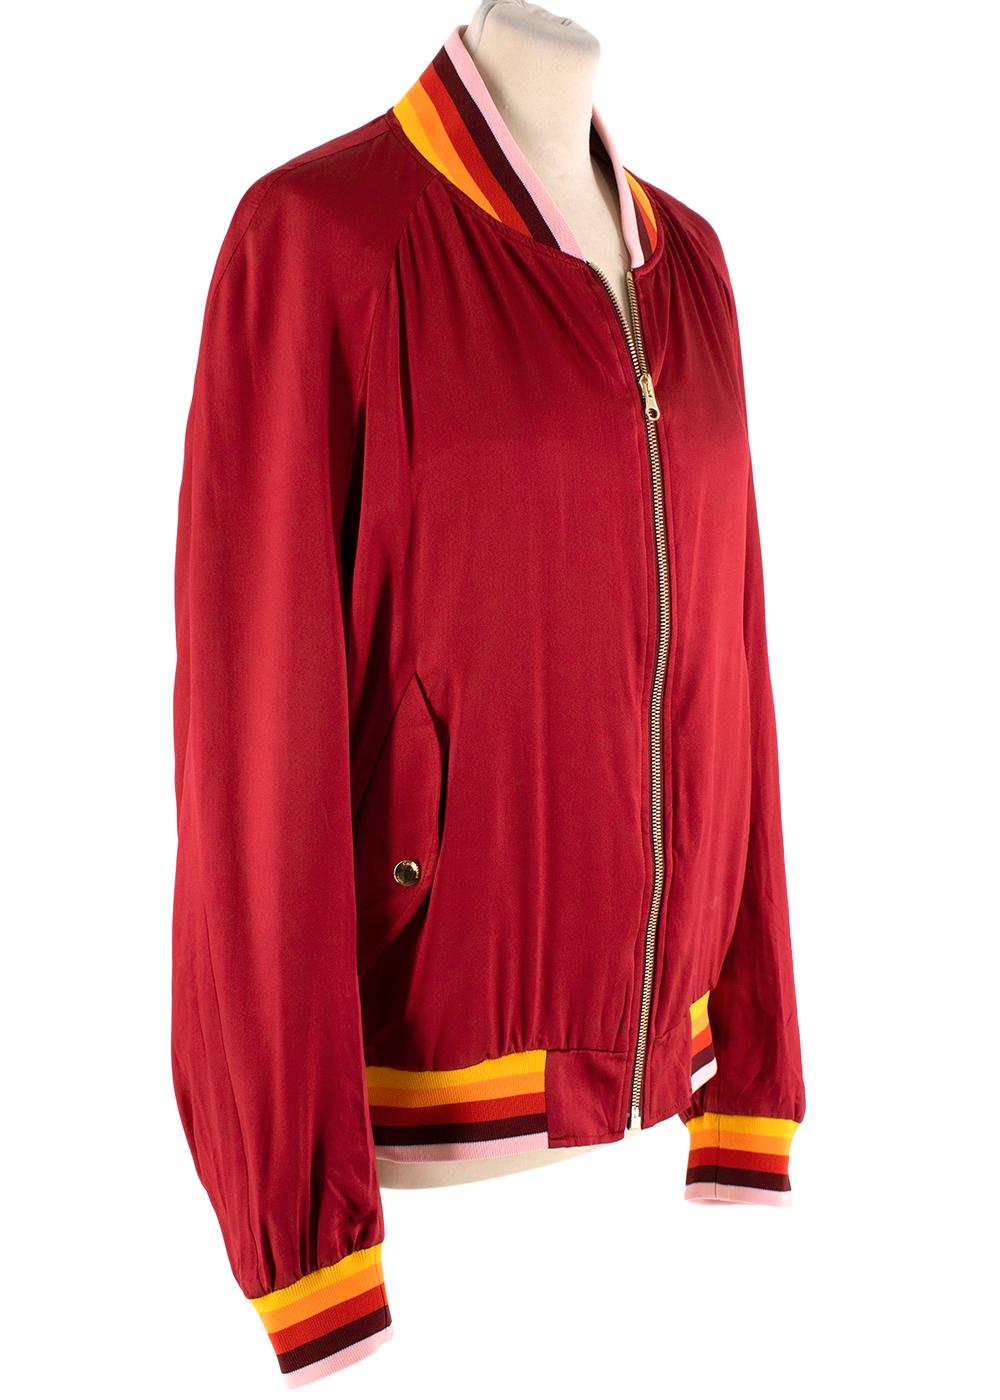 Casablanca Burgundy Silk-Satin Embroidered Souvenir Bomber Jacket

- Inspired by 70's sportswear,this silk bomber features retro souvenir jacket stylings and an embroidered 'Morocco' back panel
- Elasticated collar and cuffs in tonal stripe
- Raglan